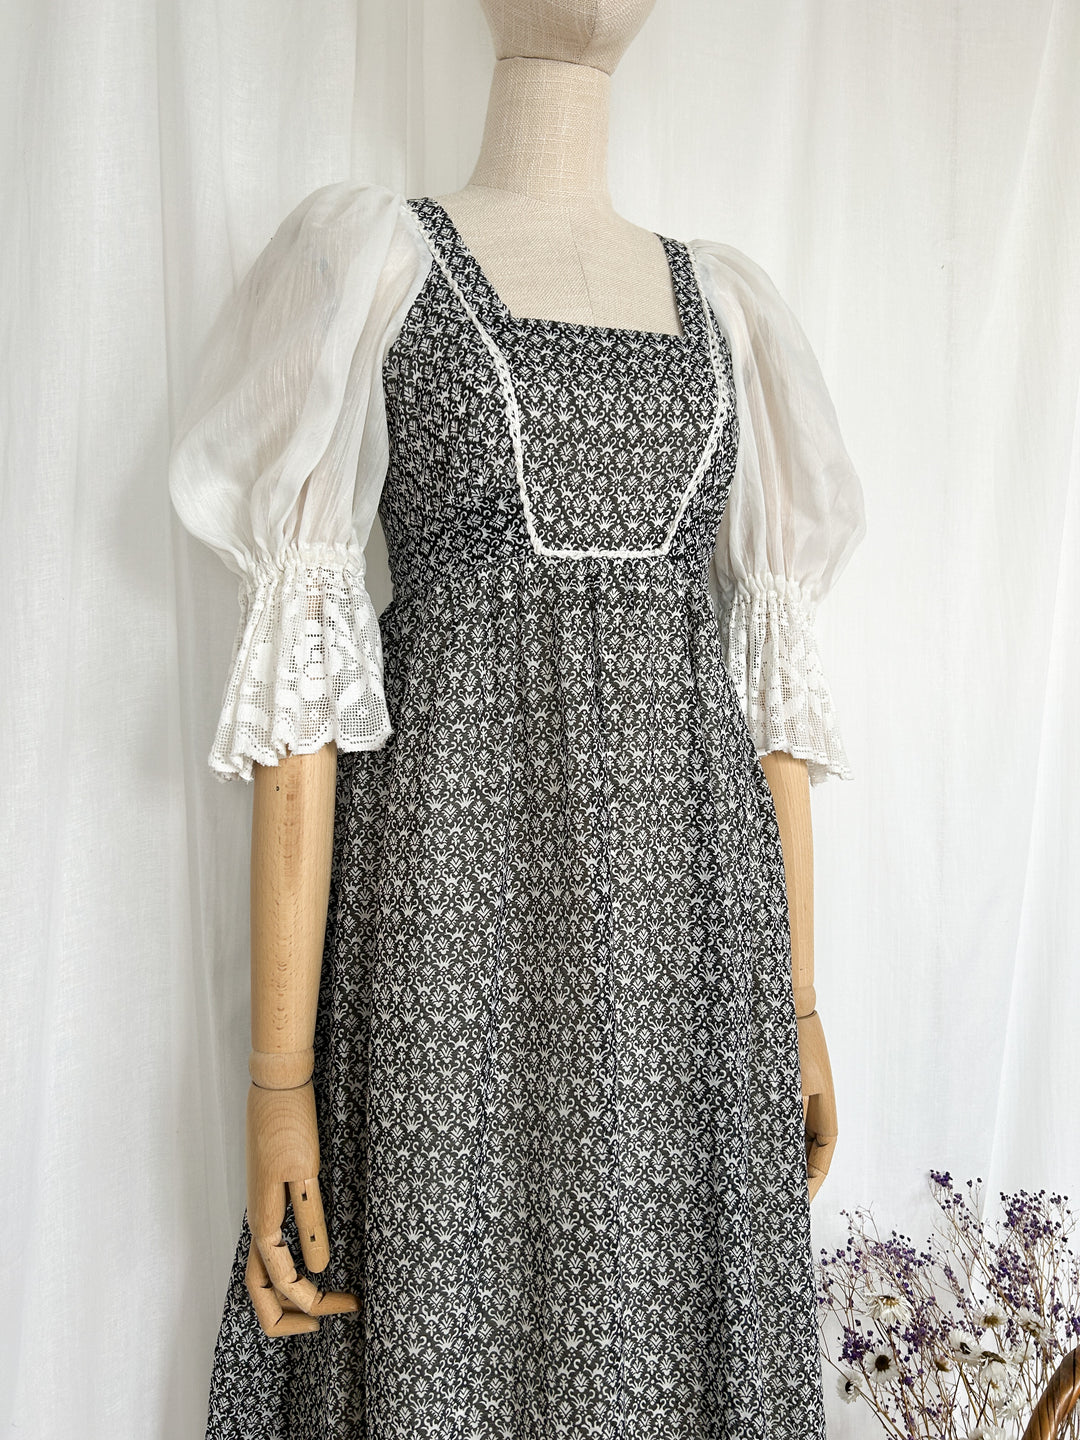 STUNNING RARE 1970S QUAD COTTON VOILE AND LACE PRAIRIE DRESS